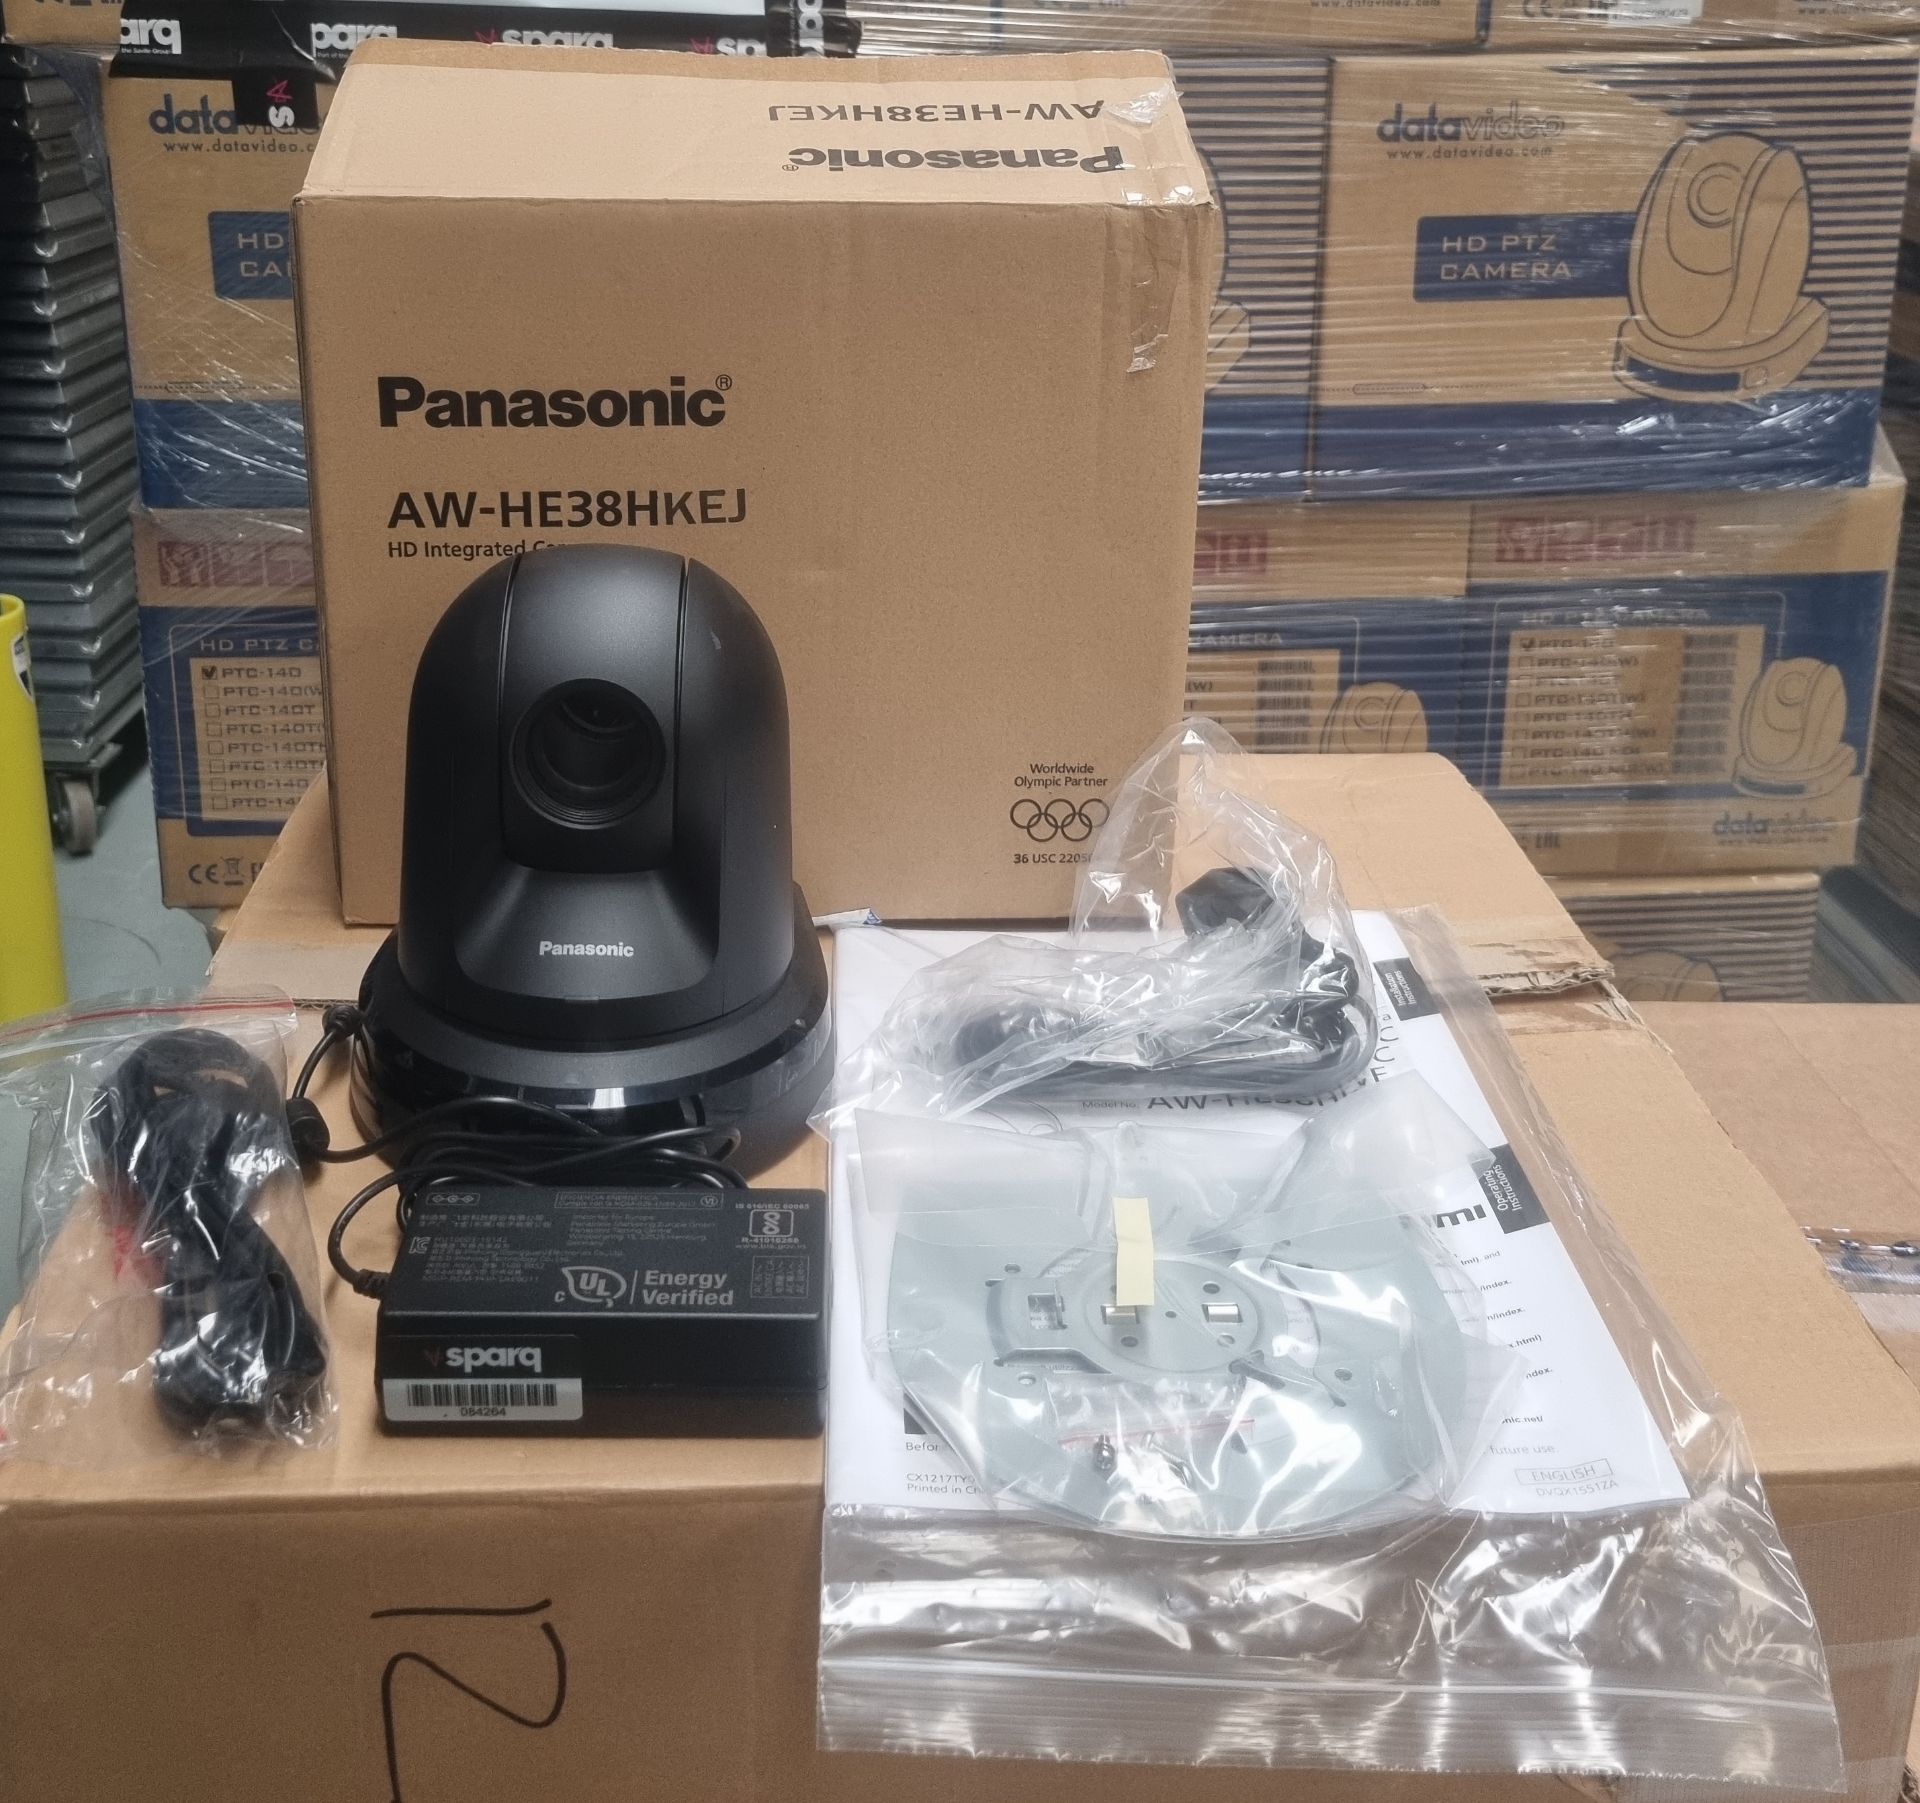 Panasonic AW-HE38HKEJ (none NDI) tested and working, STOCK IMAGE, complete with manual